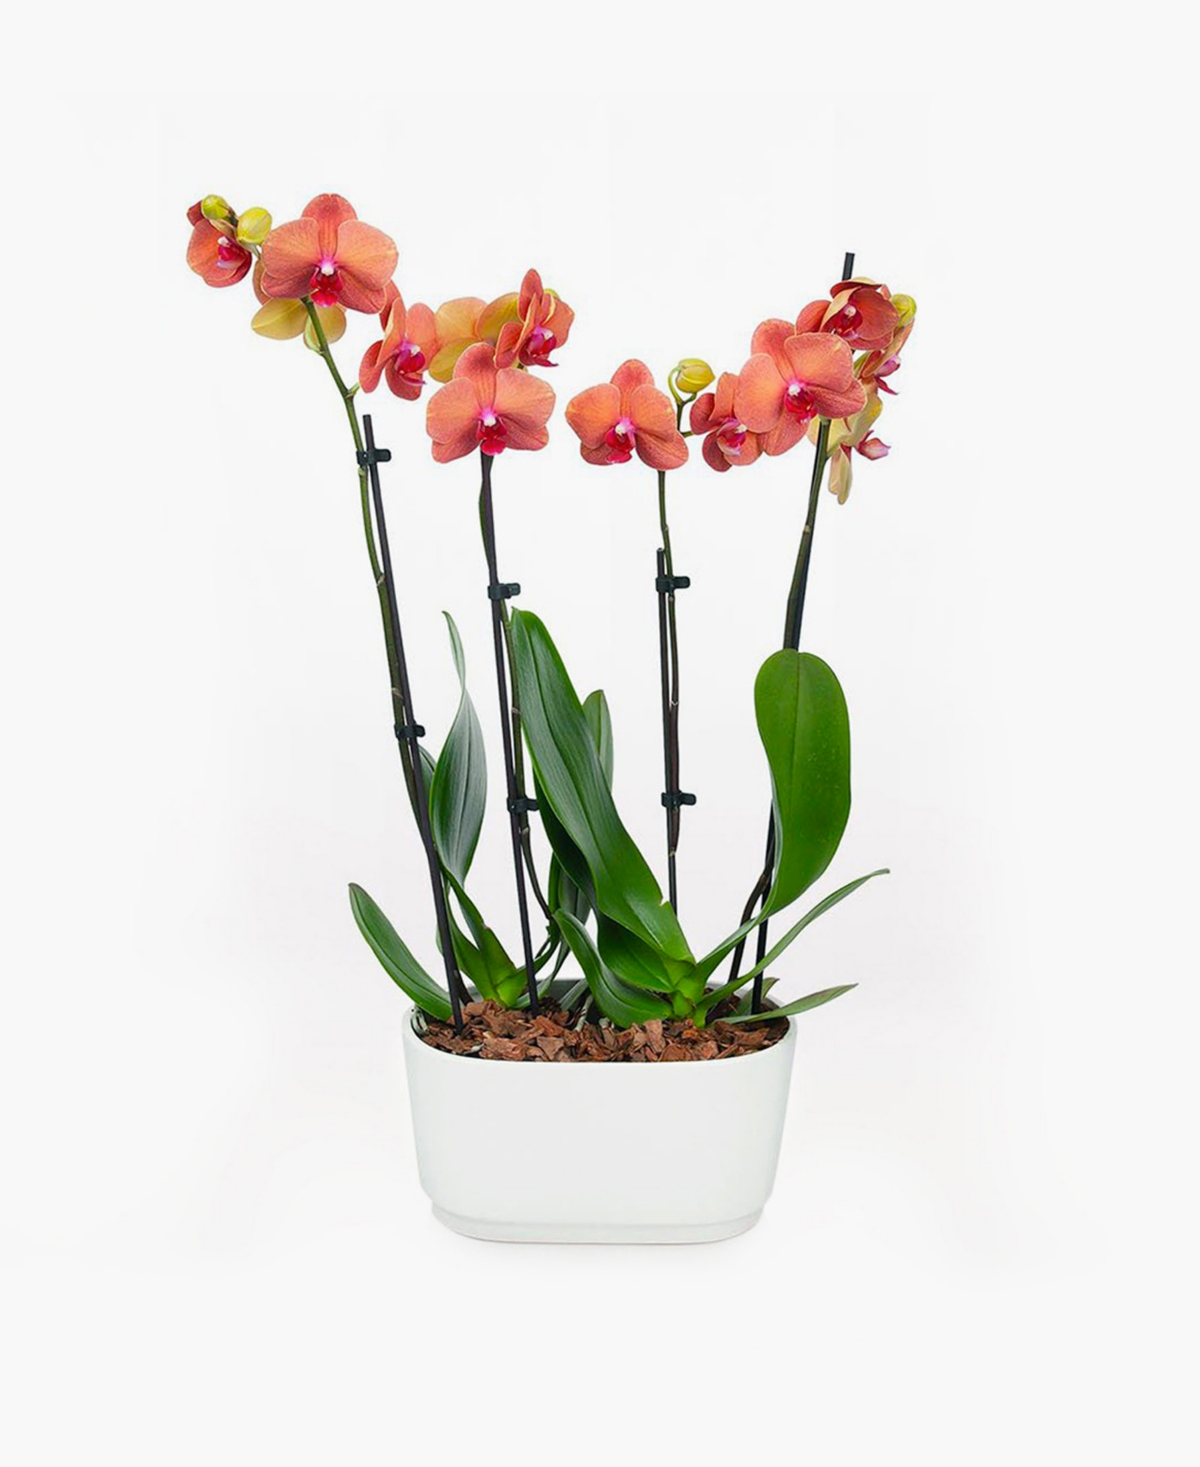 Barcelona Orchid Duo Live Plant